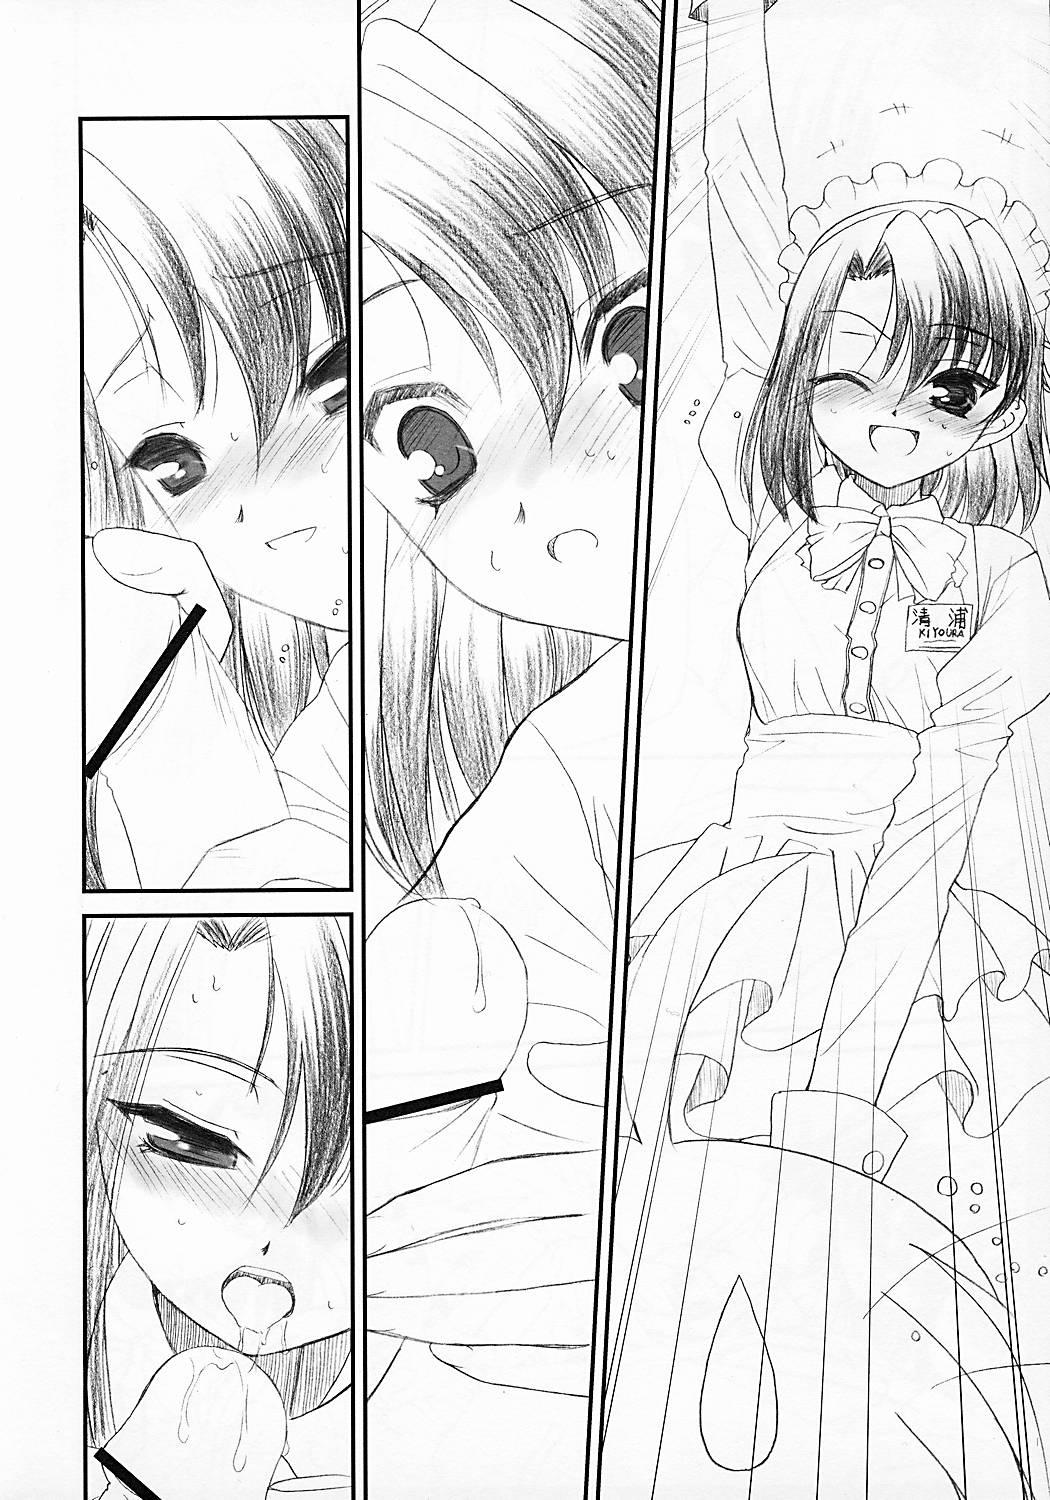 Oldvsyoung Secchan no Himichu - Prototype ver. 0.01 - School days Puto - Page 4